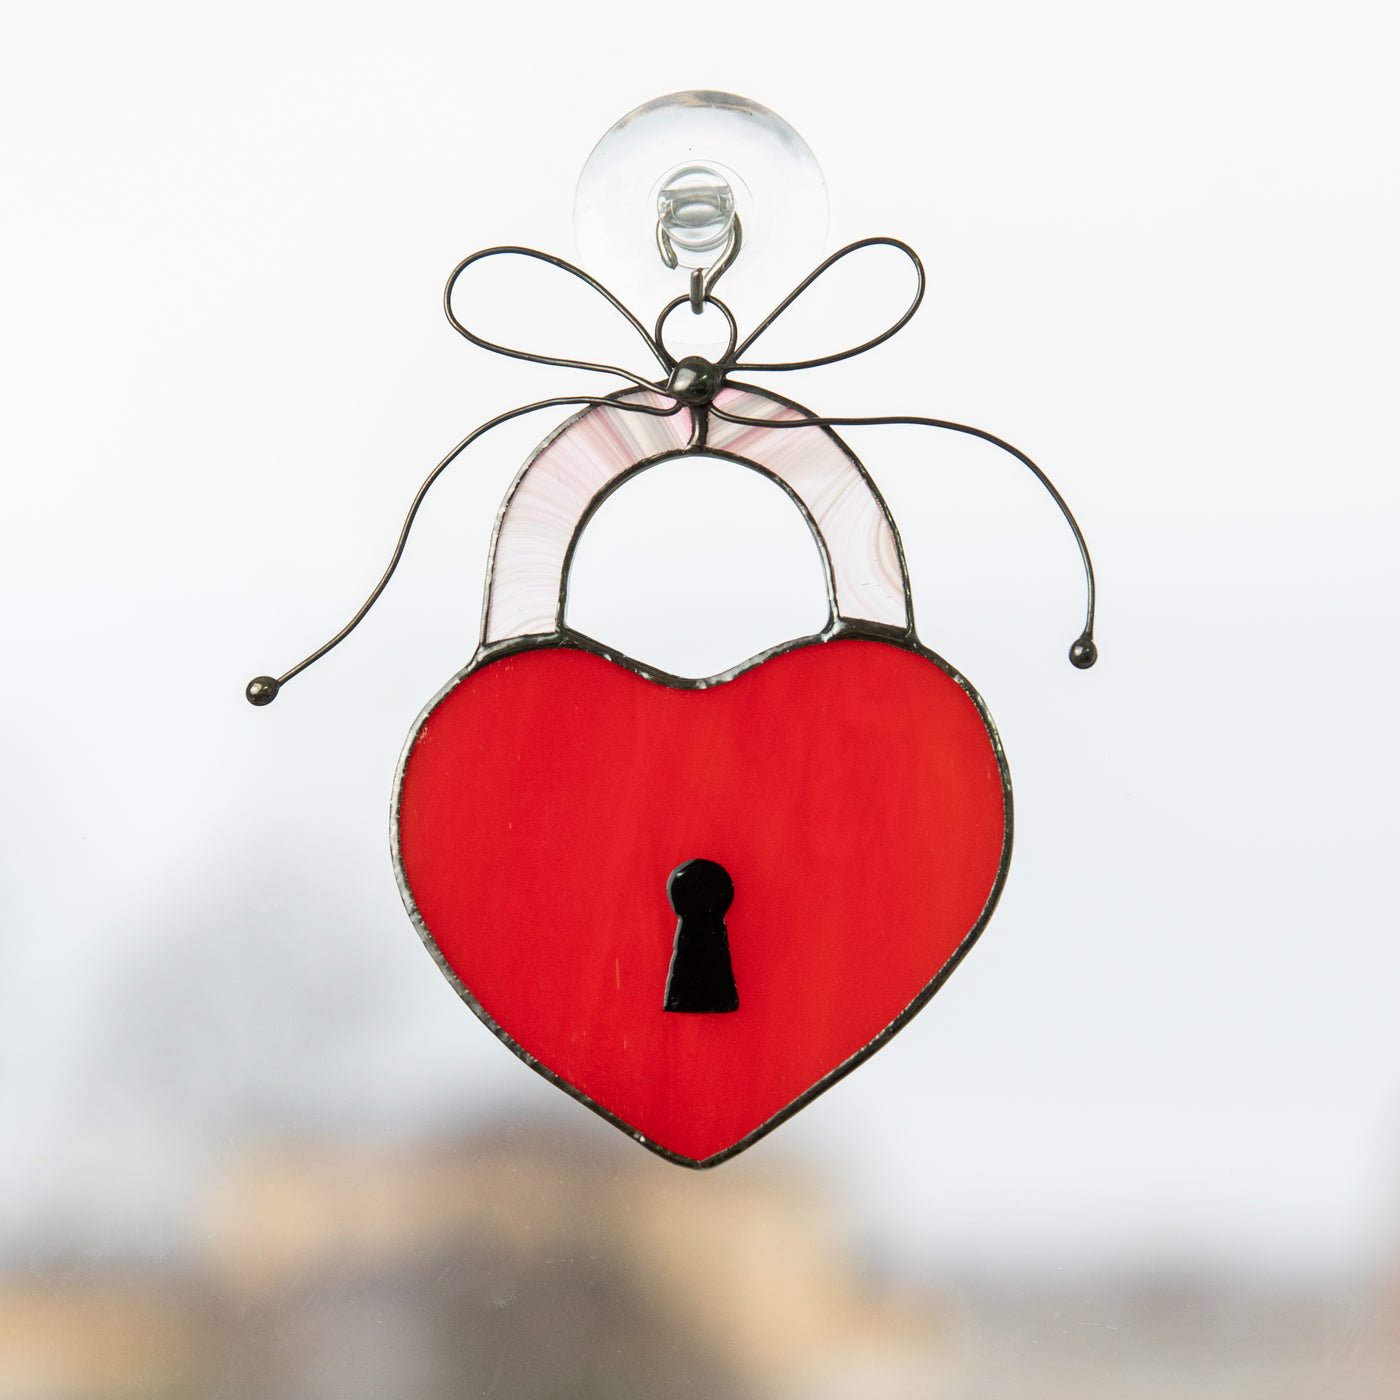 Stained glass suncatcher of a red heart with the key lock painted on it